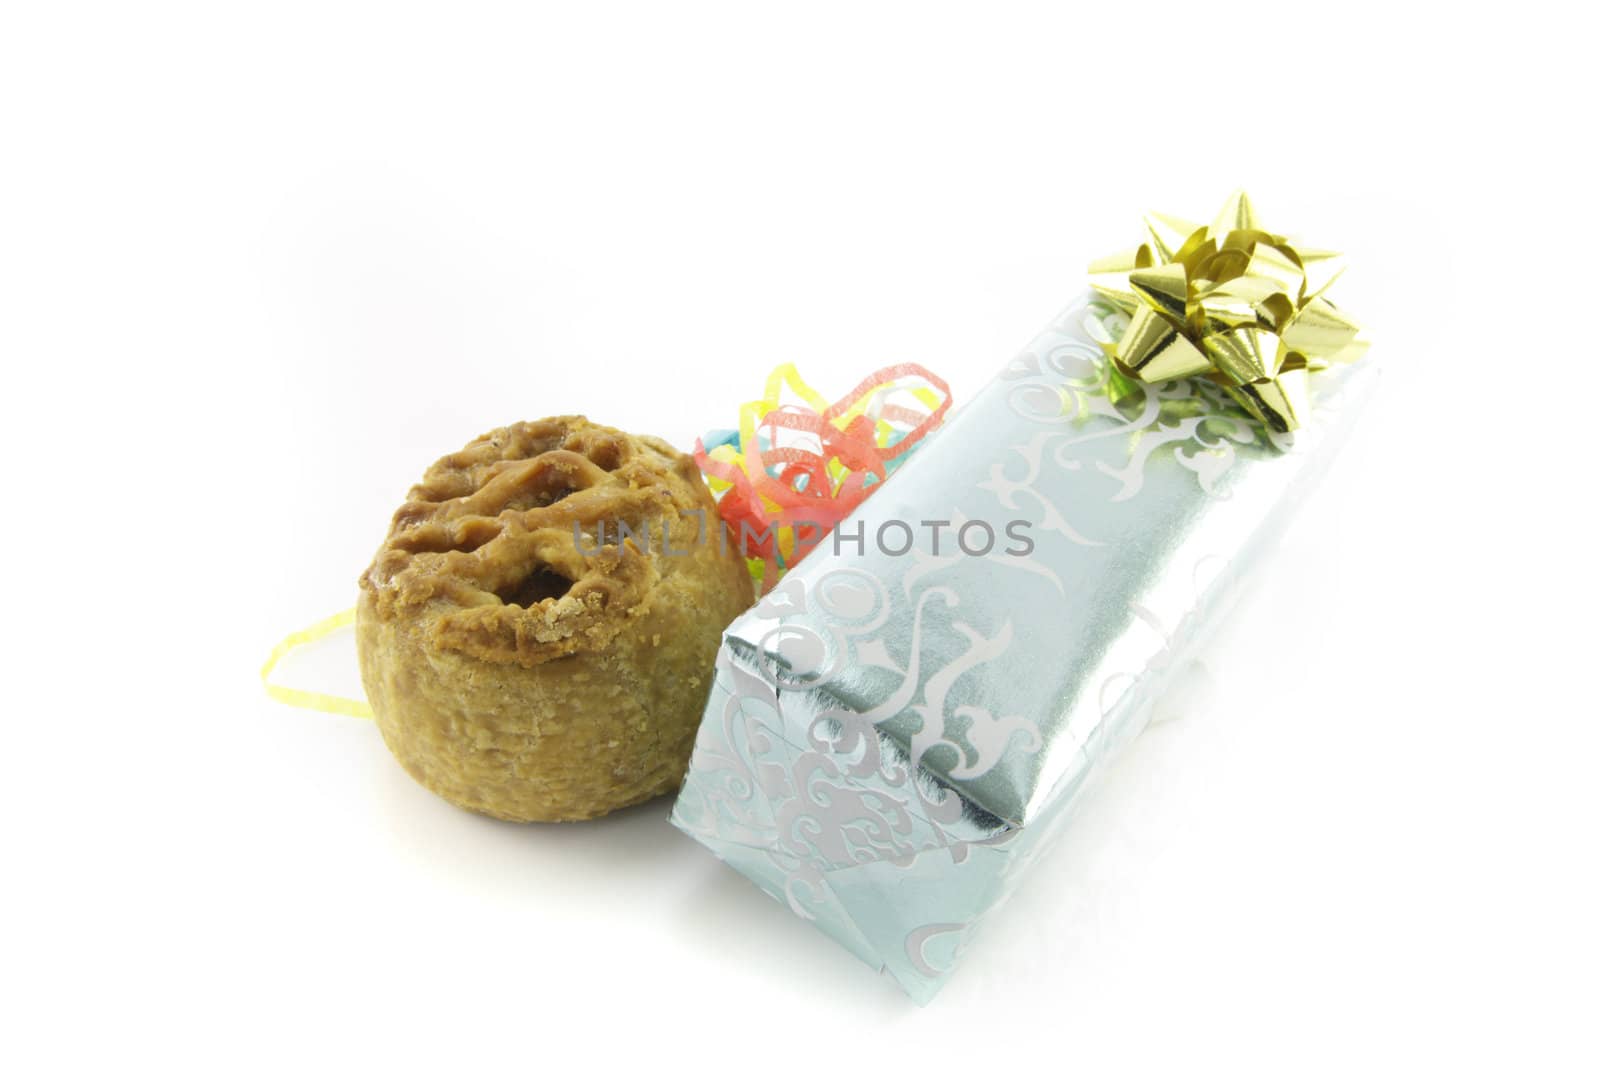 Small pork pie with a silver shiny gift and streamers on a reflective white background